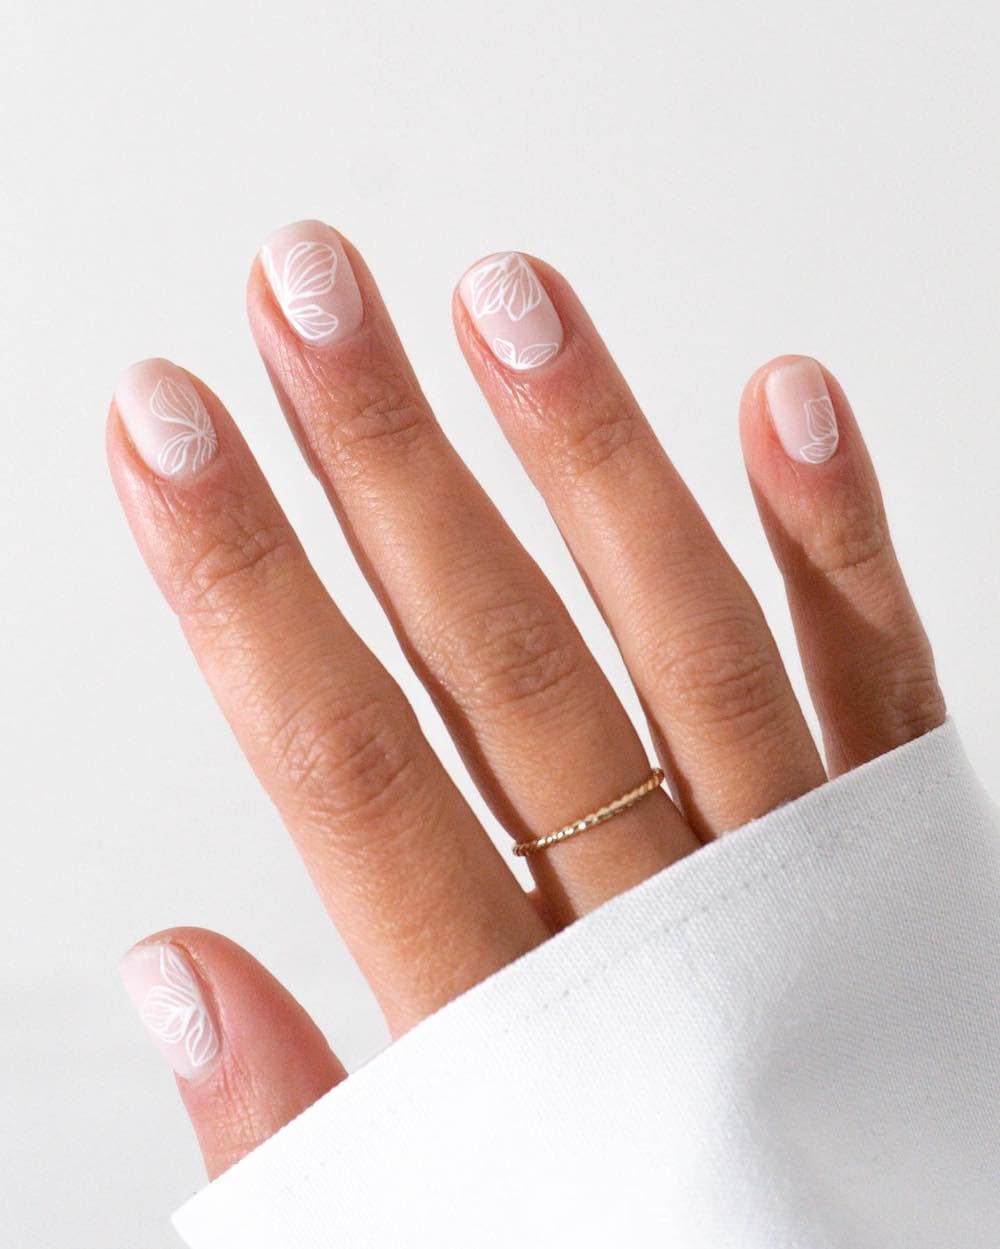 A hand with short milky white nails with white floral outlines